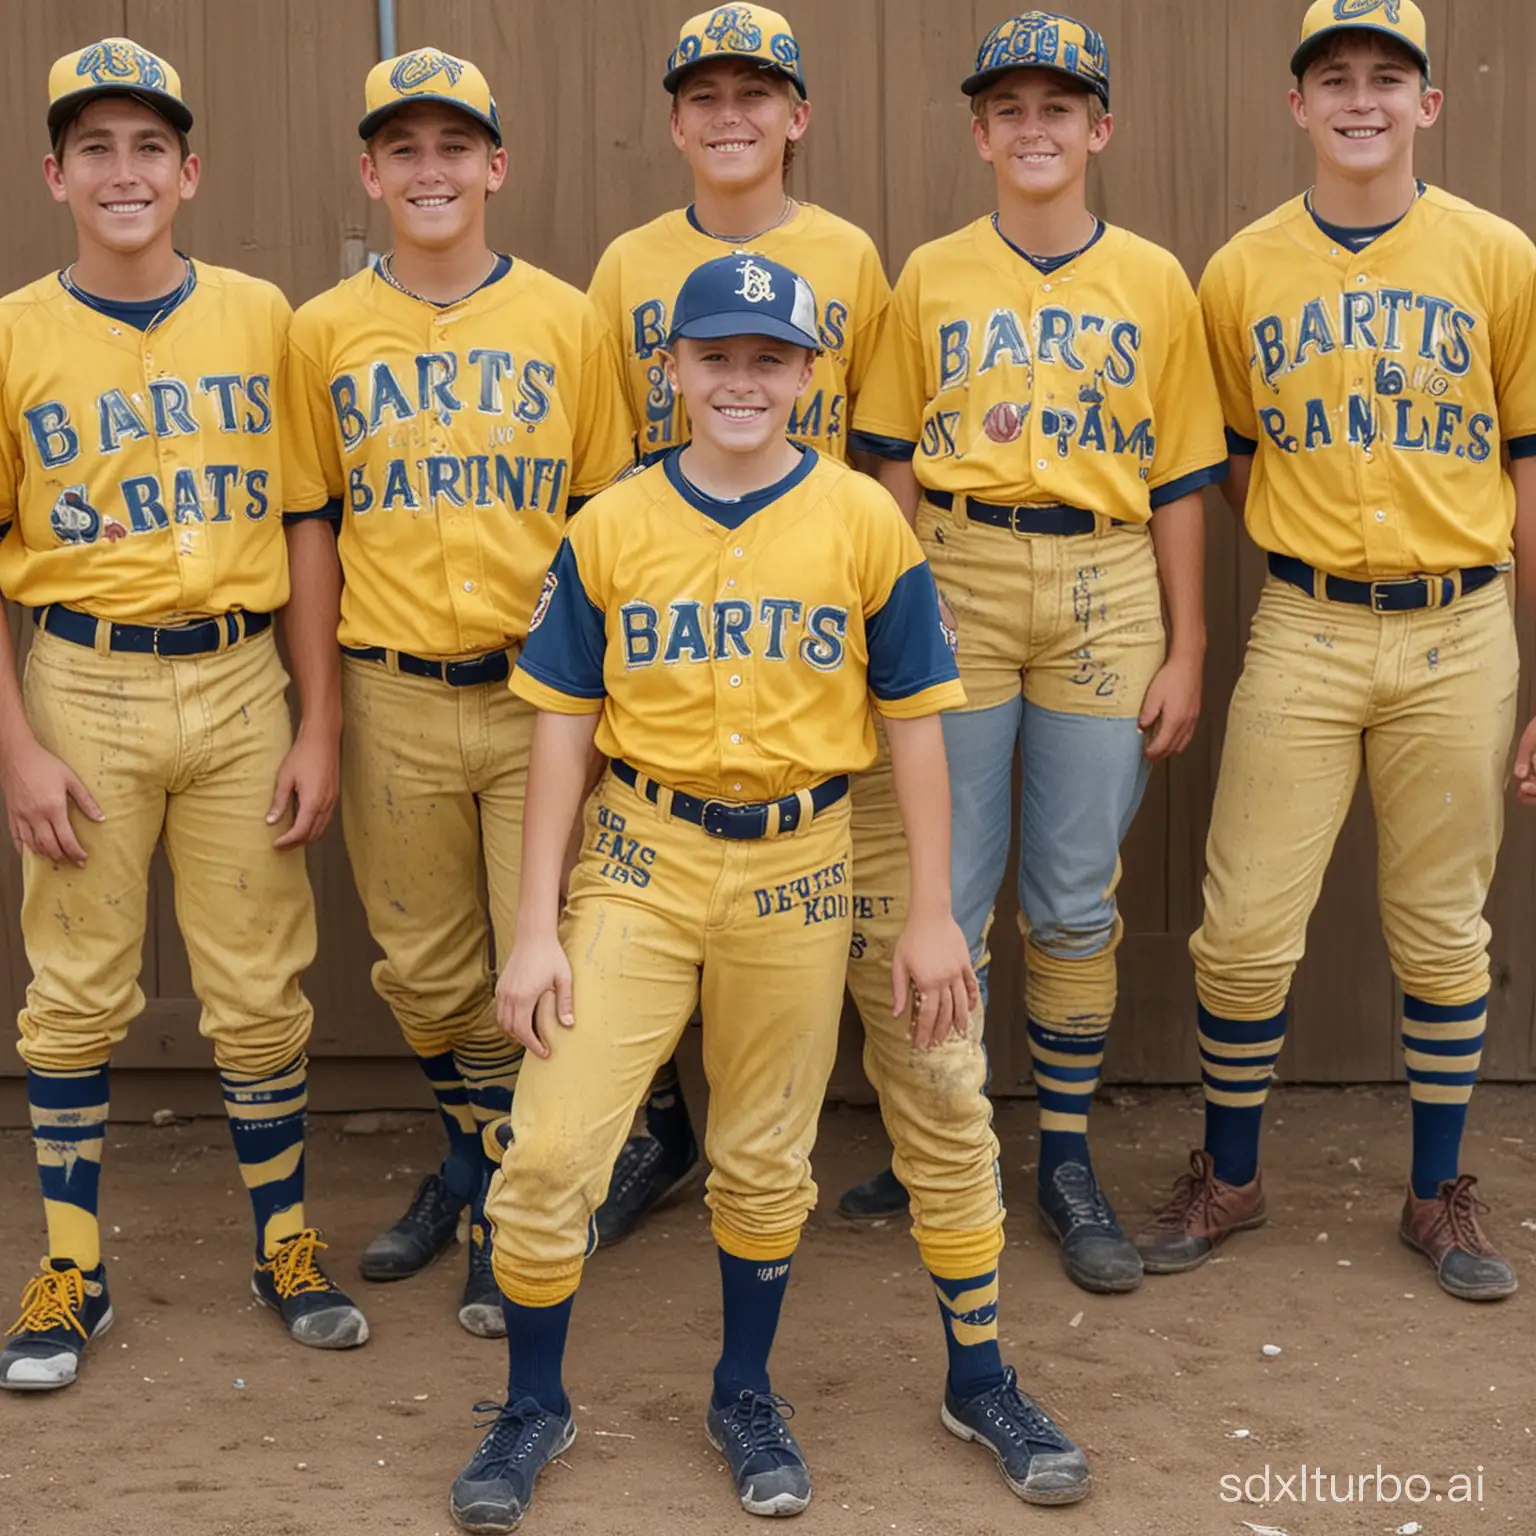 a picture of a baseball team. the shirt is yellow with the word "Barts" printed across the front. The pants are blue from the belt to the knees, and yellow from the knees to the ankles.